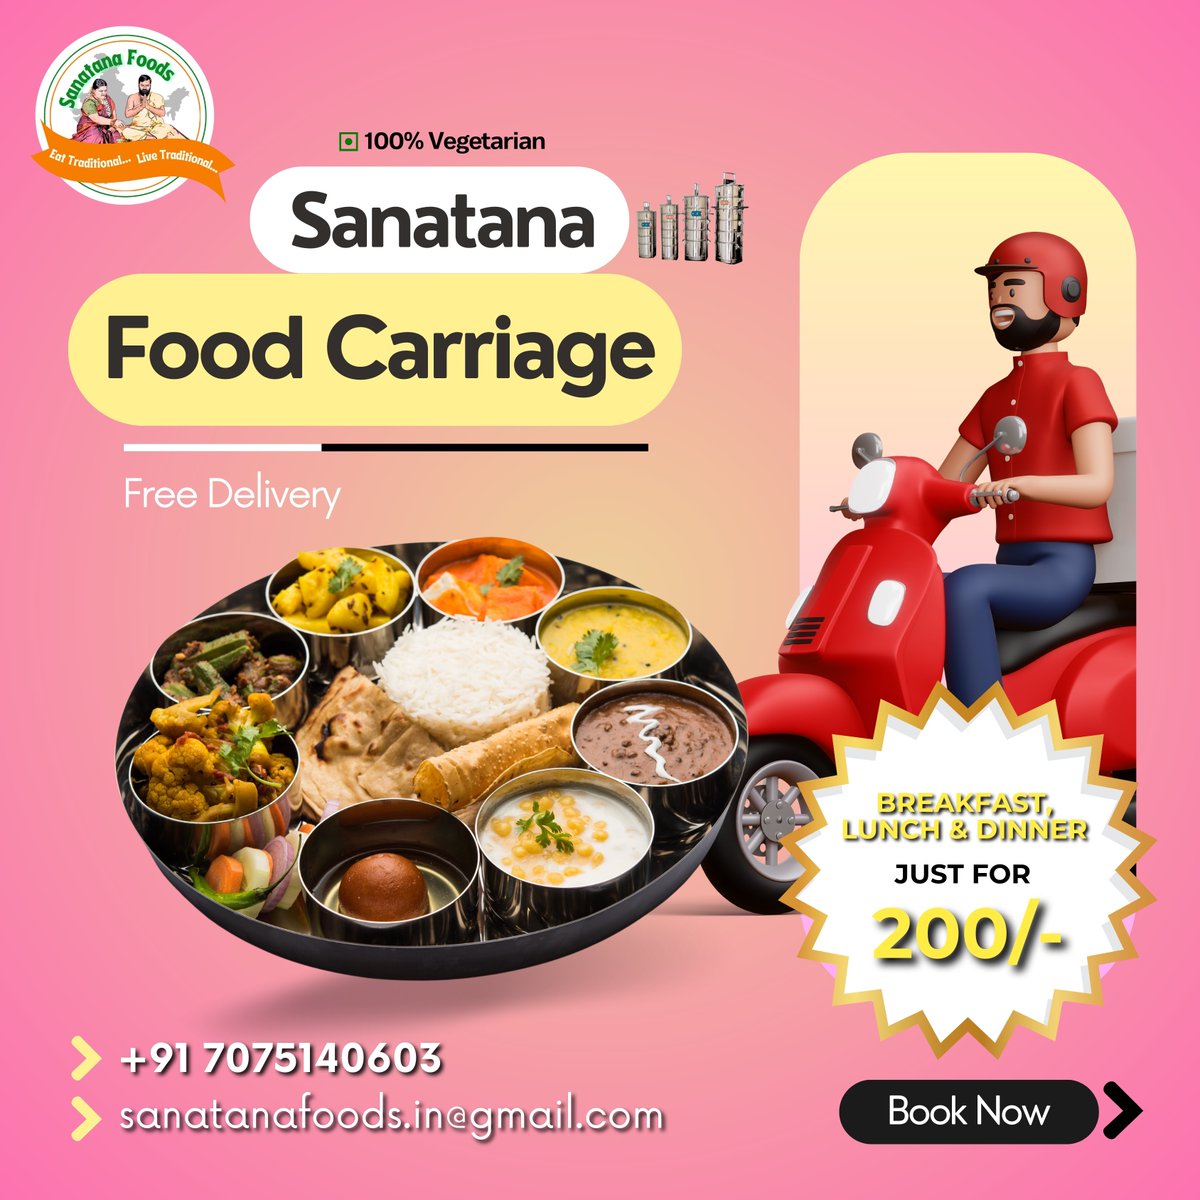 🌟 Sanatana Food Carriage - Your Ticket to Wholesome Meals! 🌟
Tag a friend who deserves hassle-free meals, and subscribe together to double the savings! 💸💖 #SanatanaCarriageBox #WholesomeMeals #ConvenientEating #SubscribeAndSave #MealtimeMadeEasy #FoodieDelights #SavingsOn